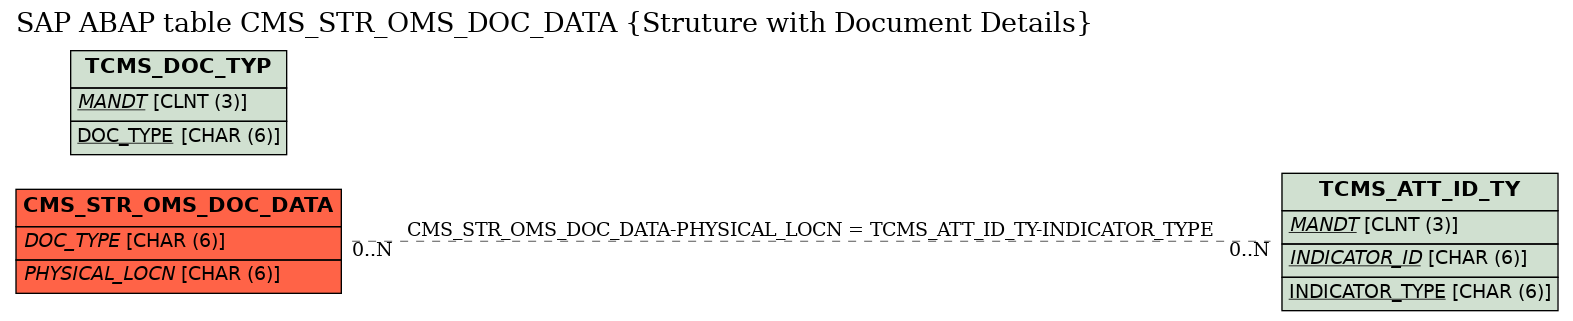 E-R Diagram for table CMS_STR_OMS_DOC_DATA (Struture with Document Details)